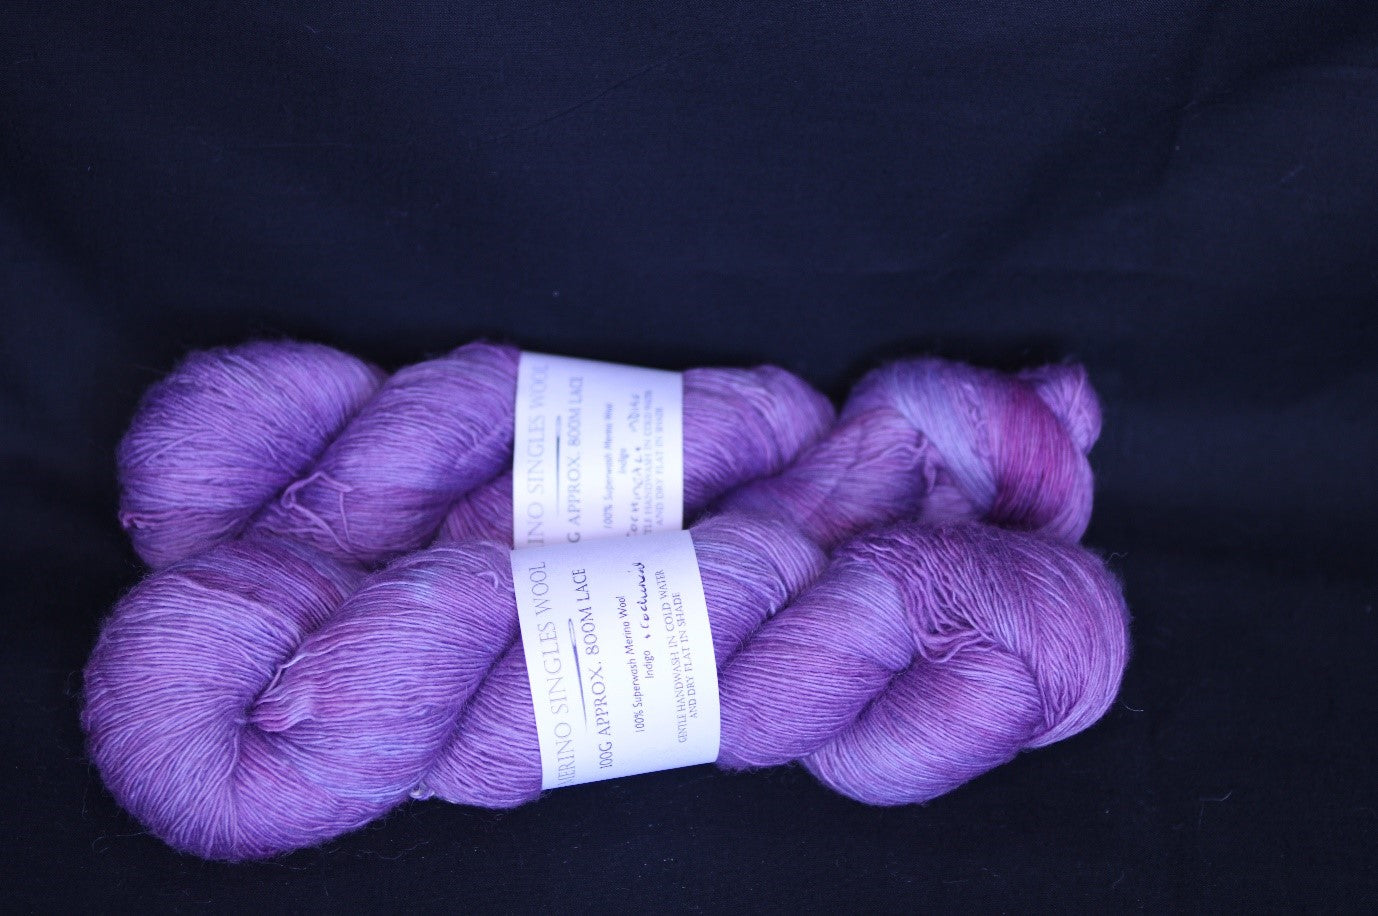 Purple and pink merino singles lace